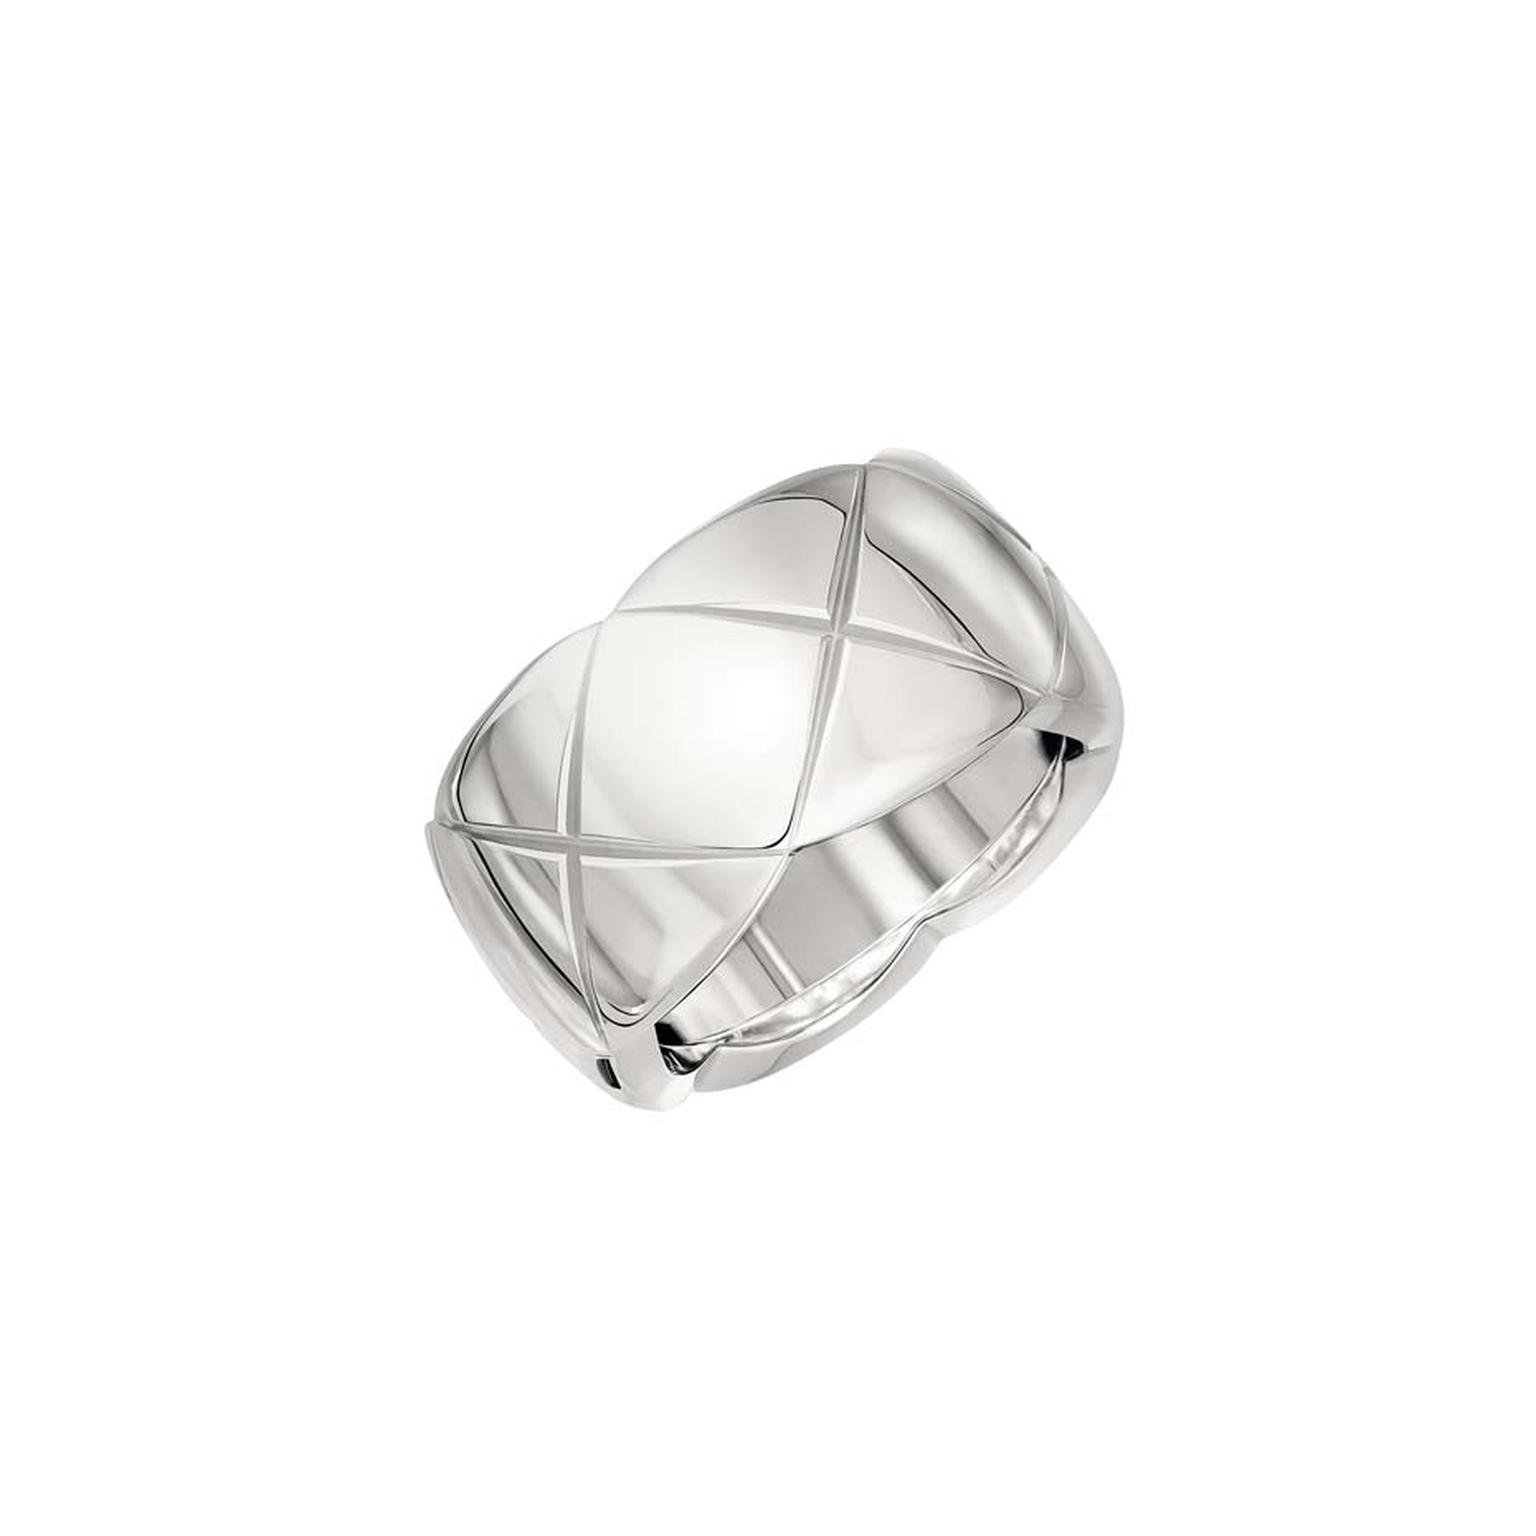 Medium white gold ring from the new Coco Crush collection of Chanel jewellery.